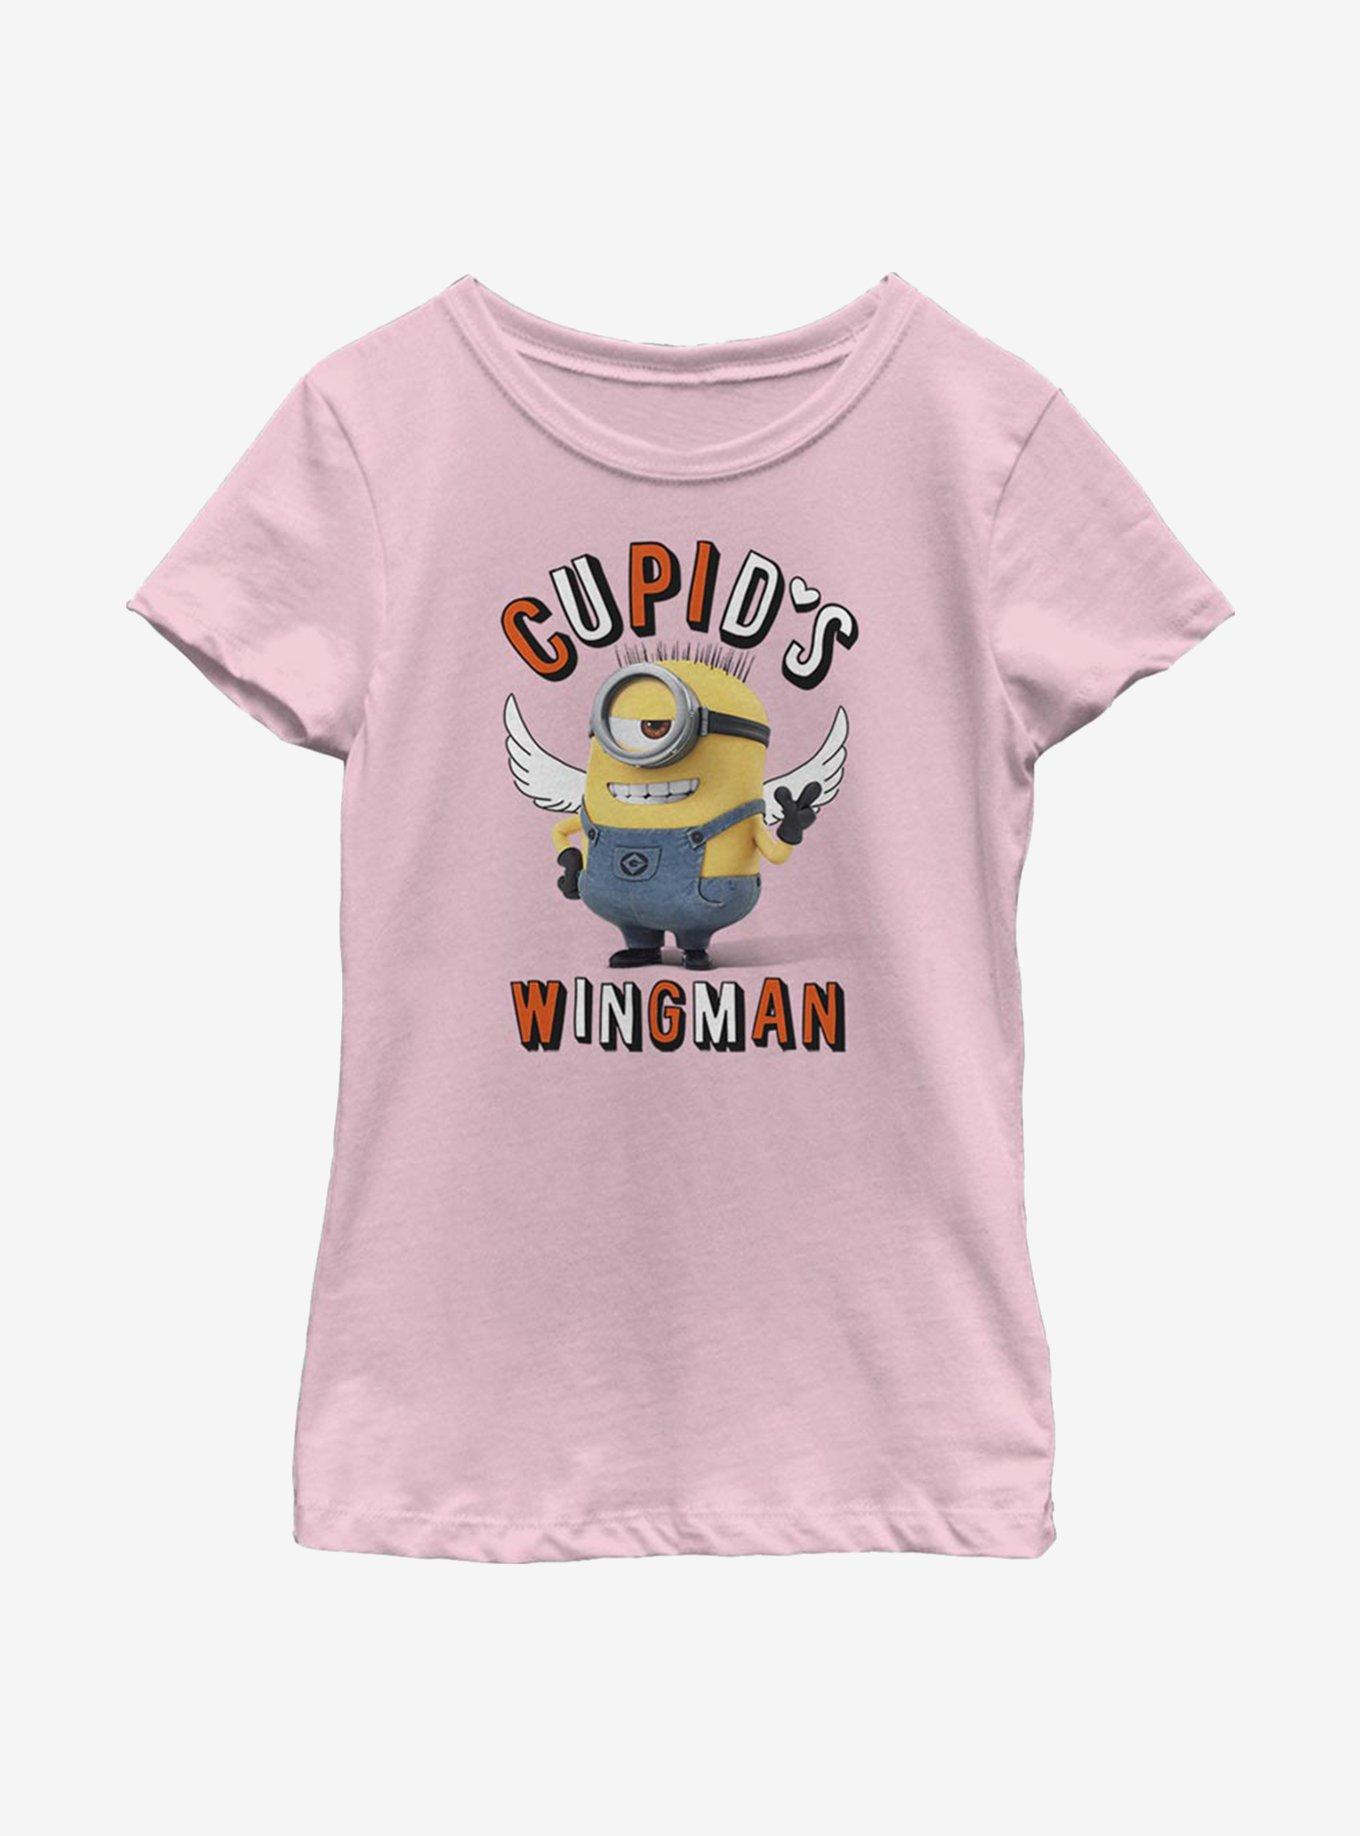 Minions Cupid's Wing Man Youth Girls T-Shirt, PINK, hi-res